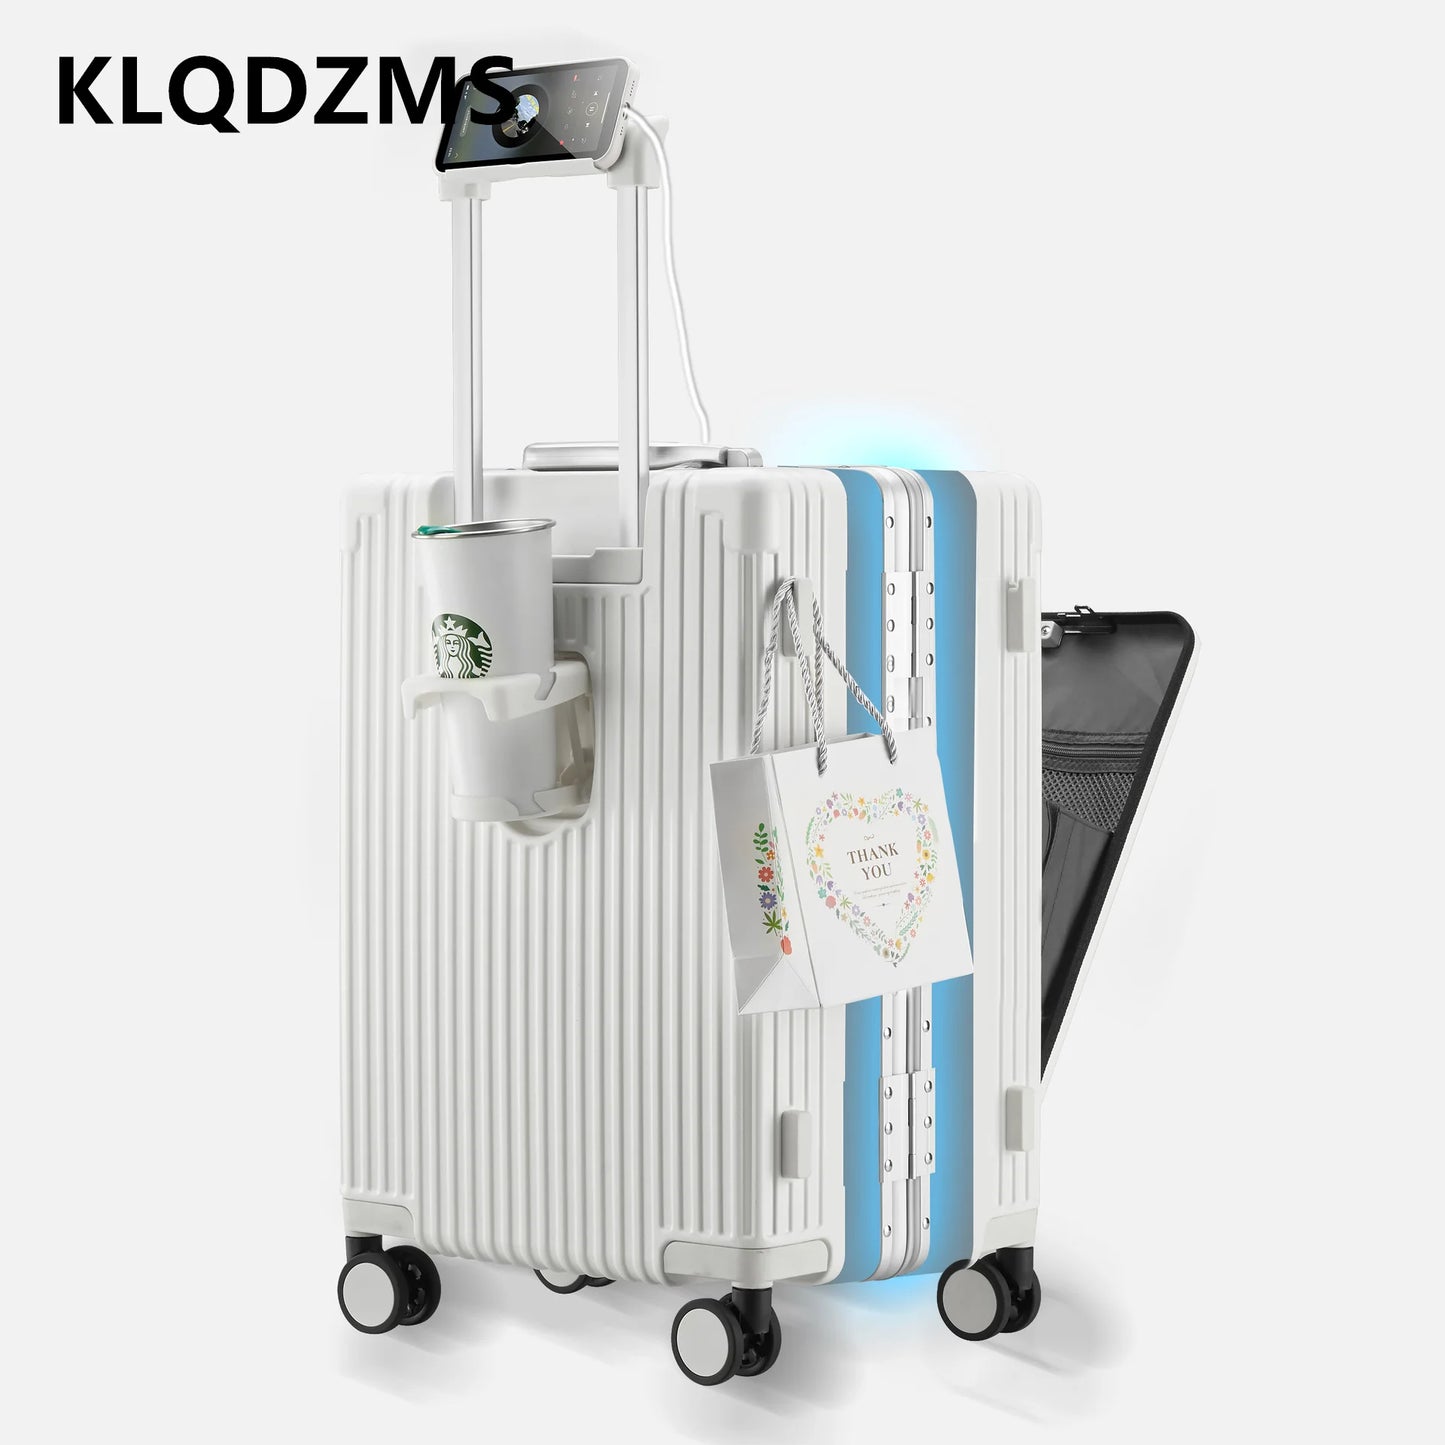 KLQDZMS Laptop Suitcase Front Opening Boarding Case 18 Inch Aluminum Frame Trolley Case Wheeled Travel Bag Cabin Luggage